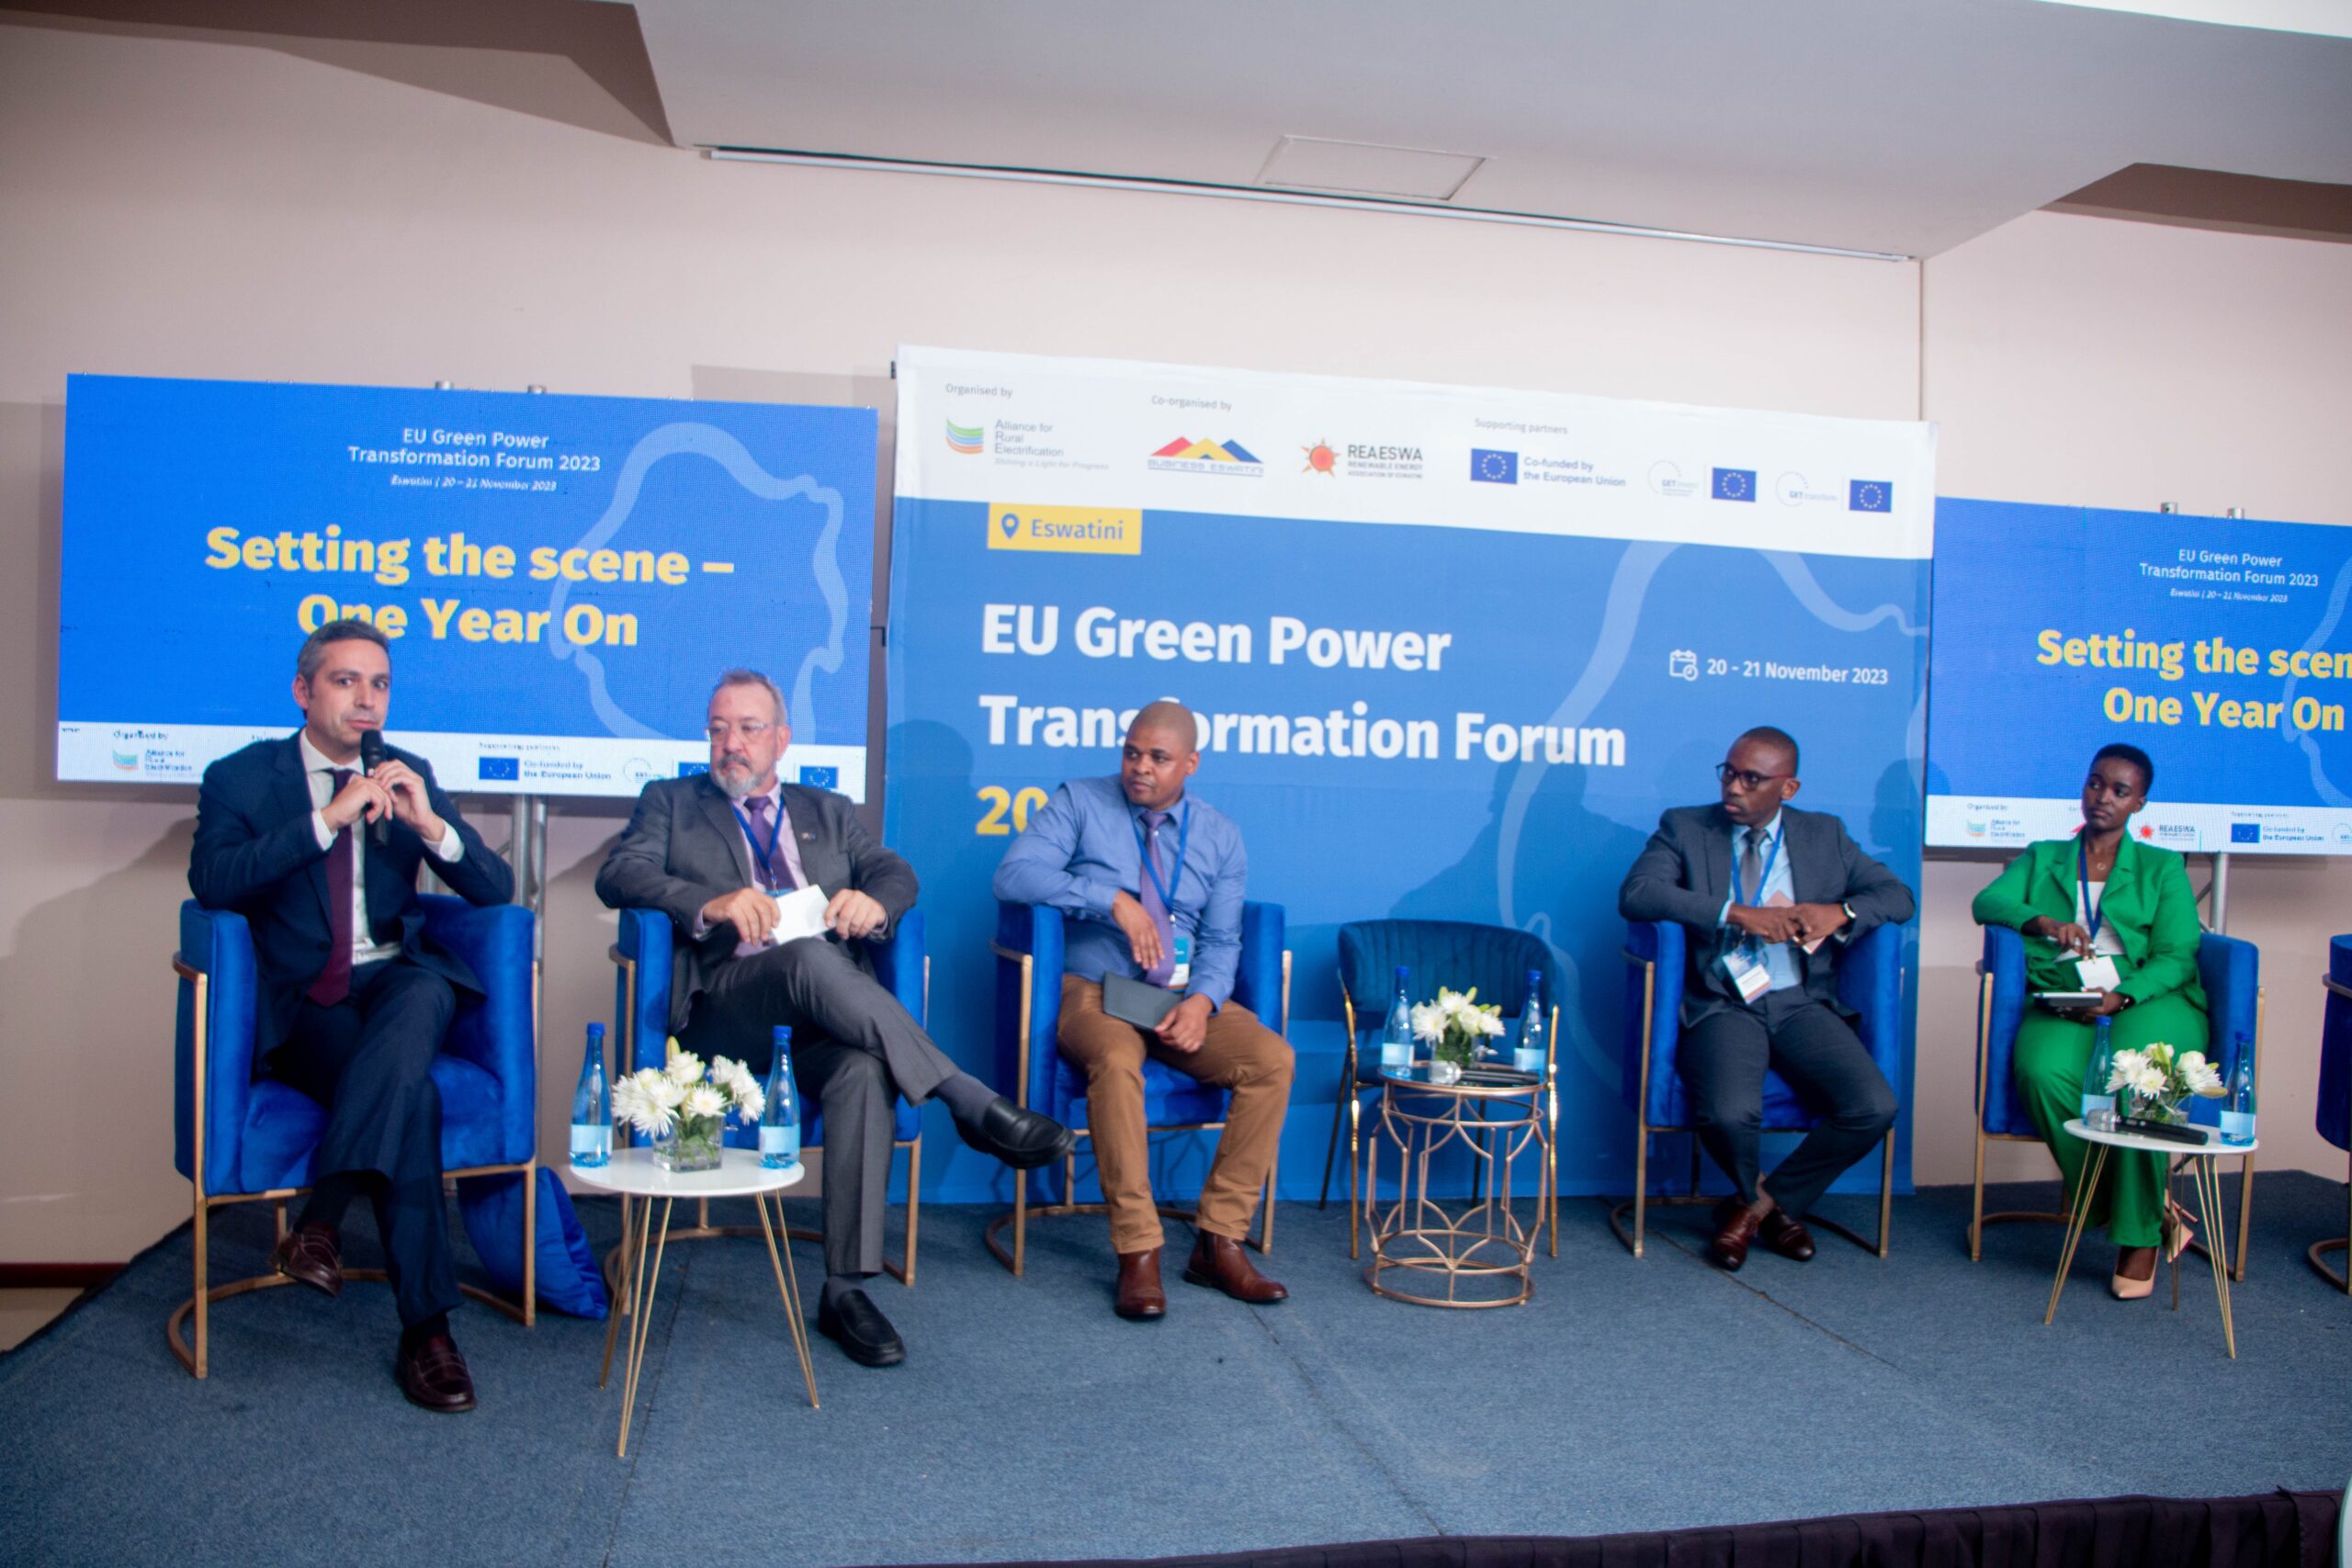 Setting the Scene session at the EU Green Power Transformation Forum 2023 in Eswatini.